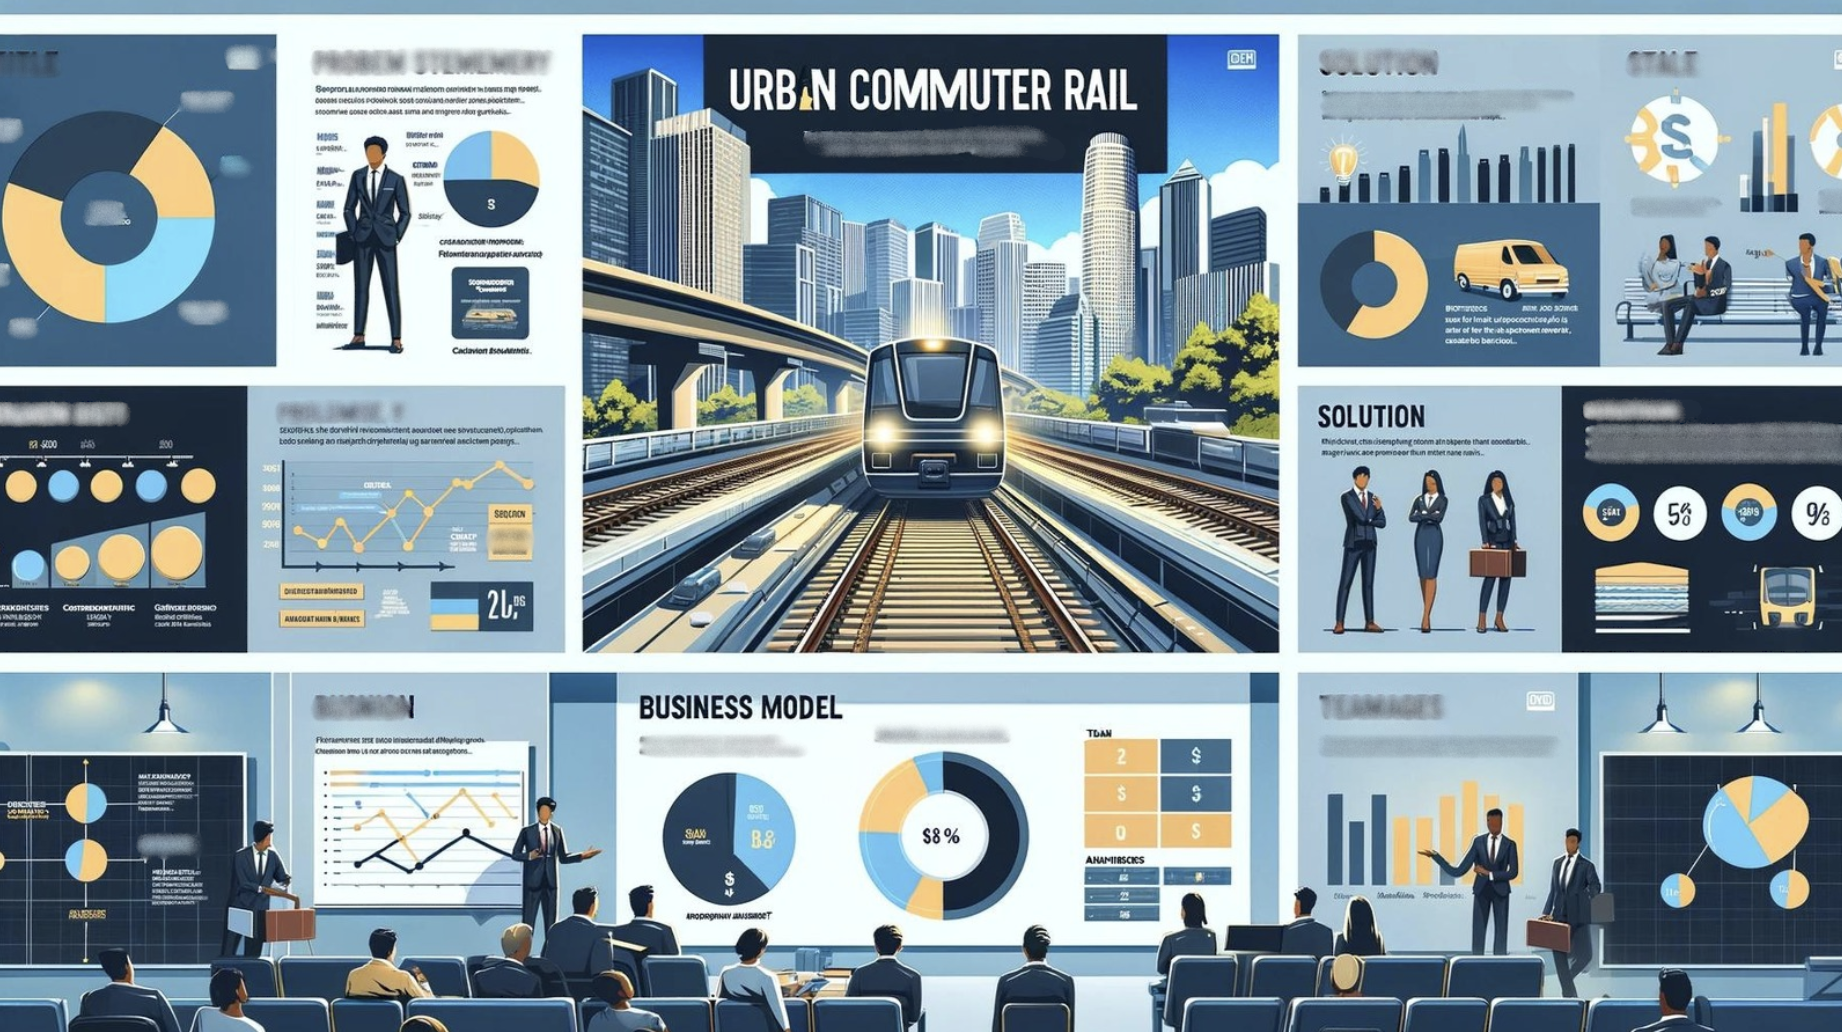 pitch deck slides for the urban commuter rail transport business